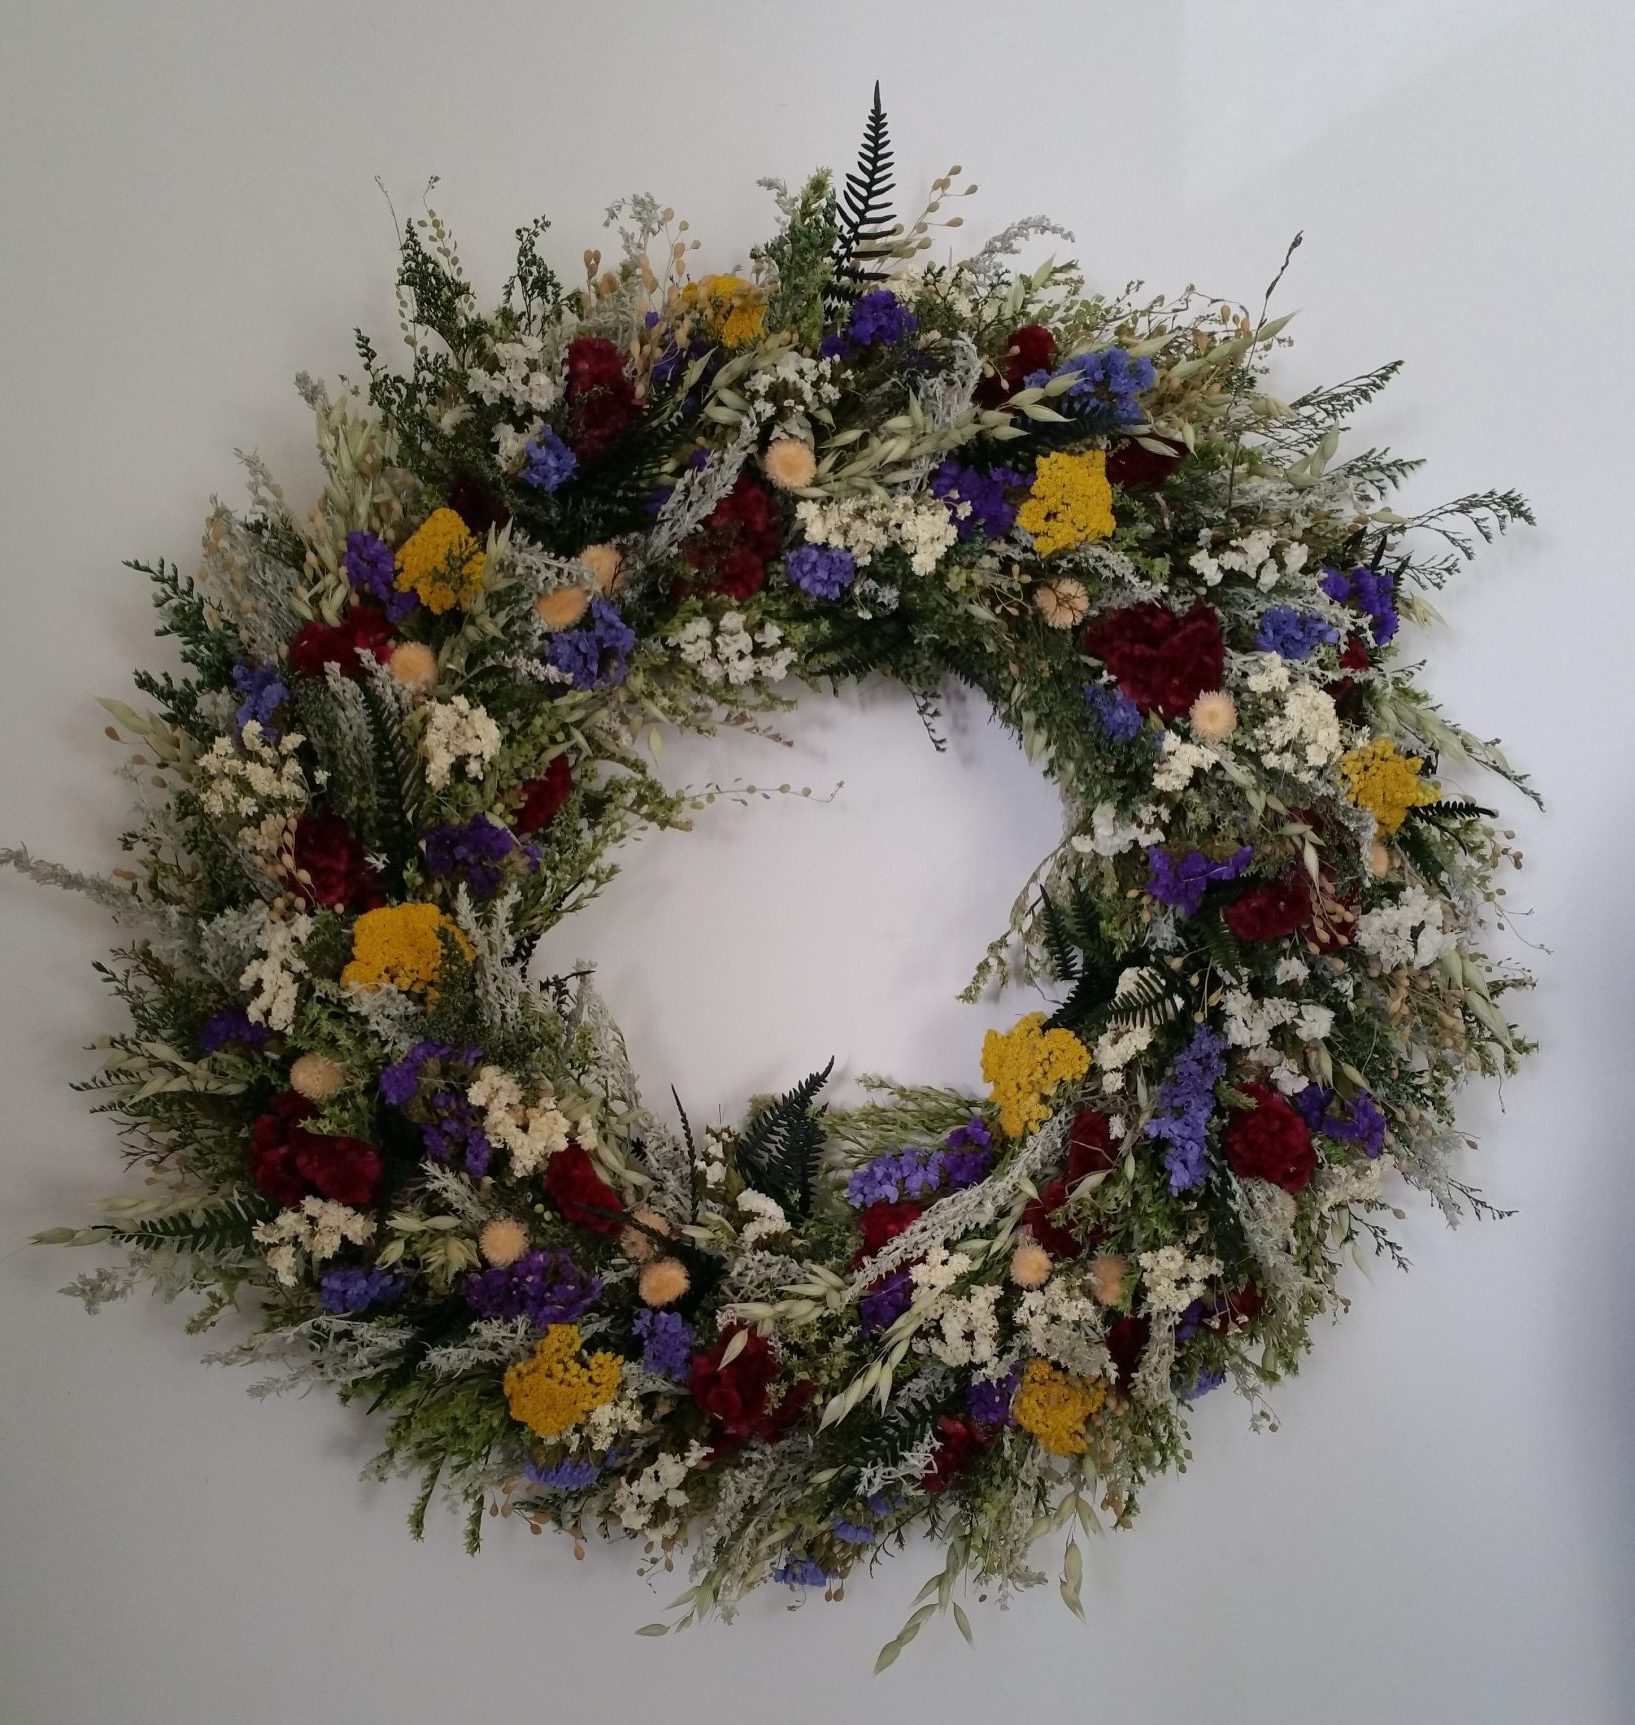 Dried Wildflowers and Grasses Vine Wreath (Pinks)